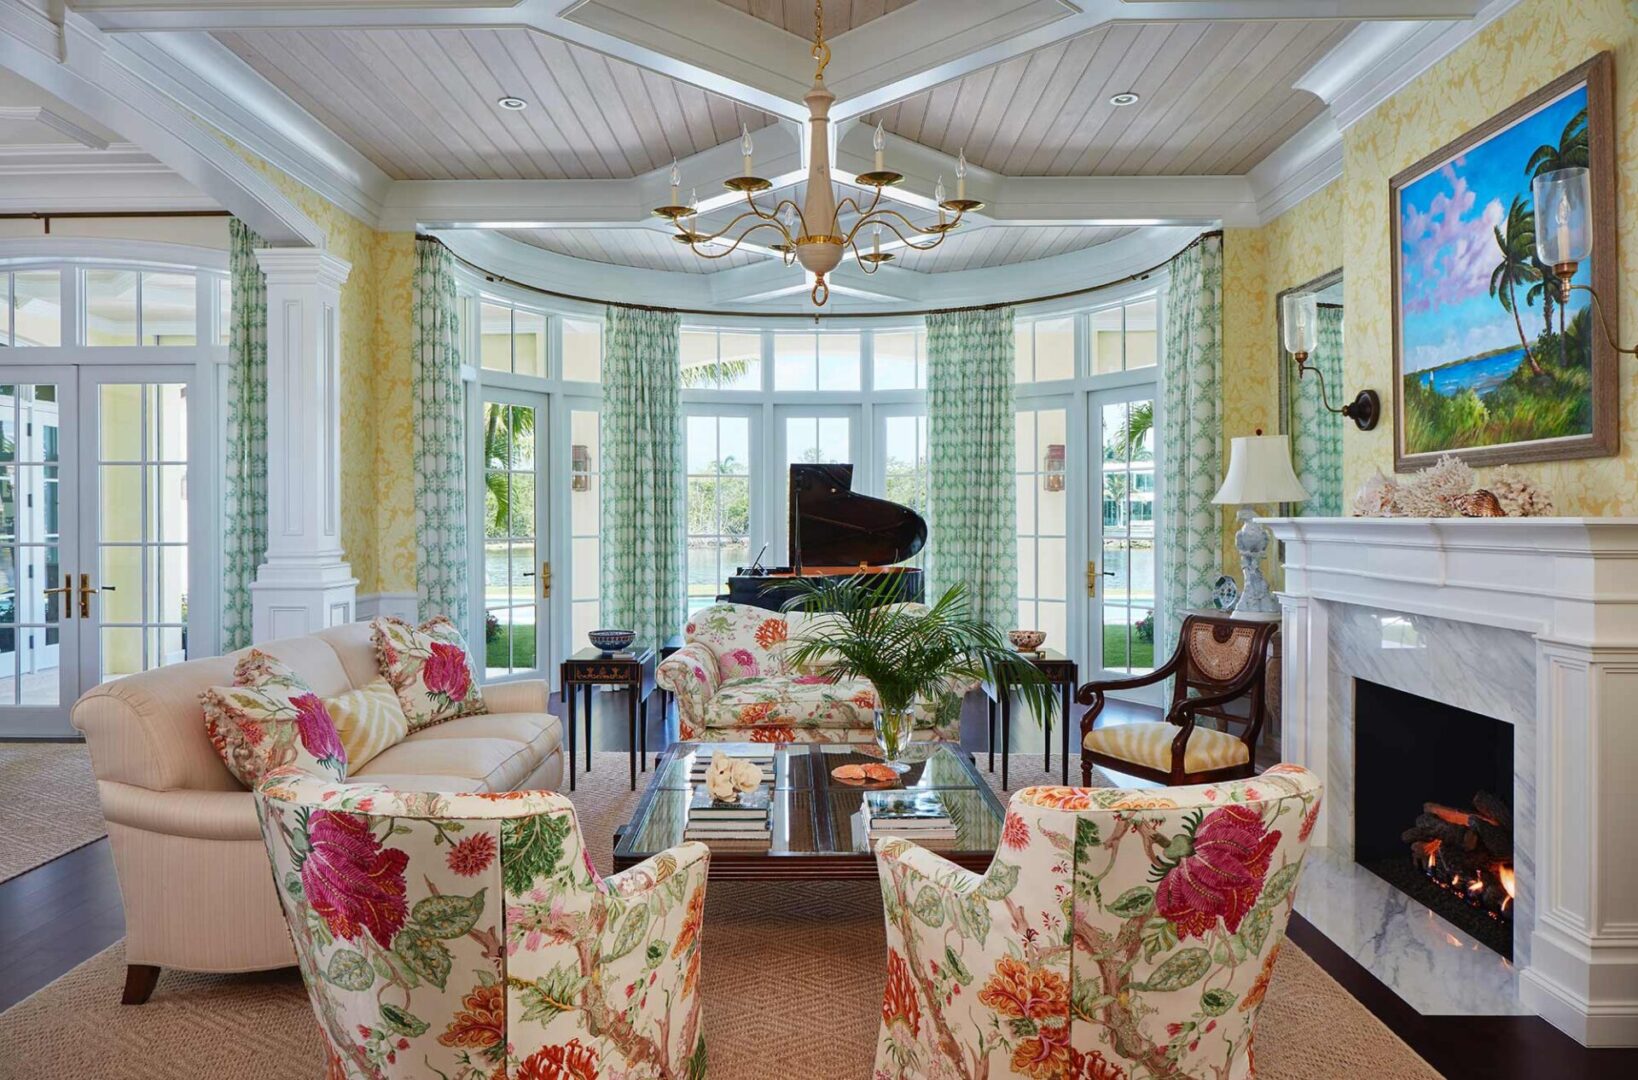 A living room with floral furniture and a piano.